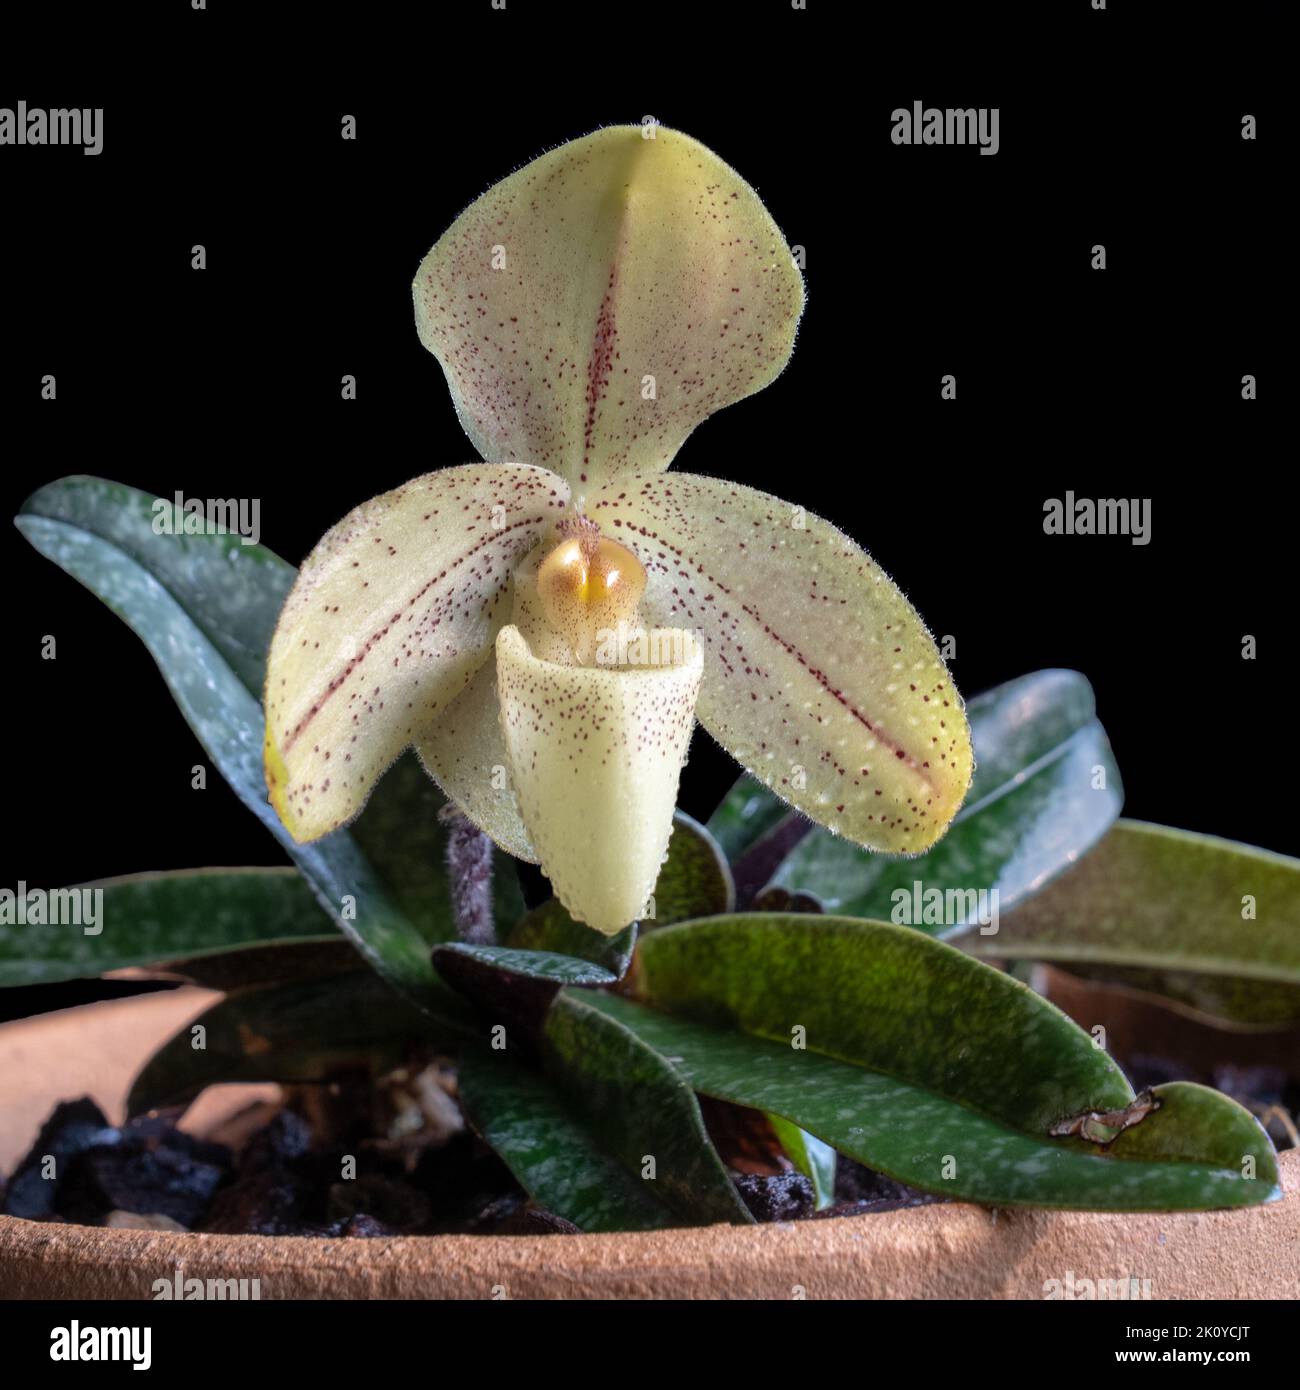 Closeup view of lady slipper orchid species paphiopedilum concolor striatum blooming with yellow flower isolated on black background with water drops Stock Photo